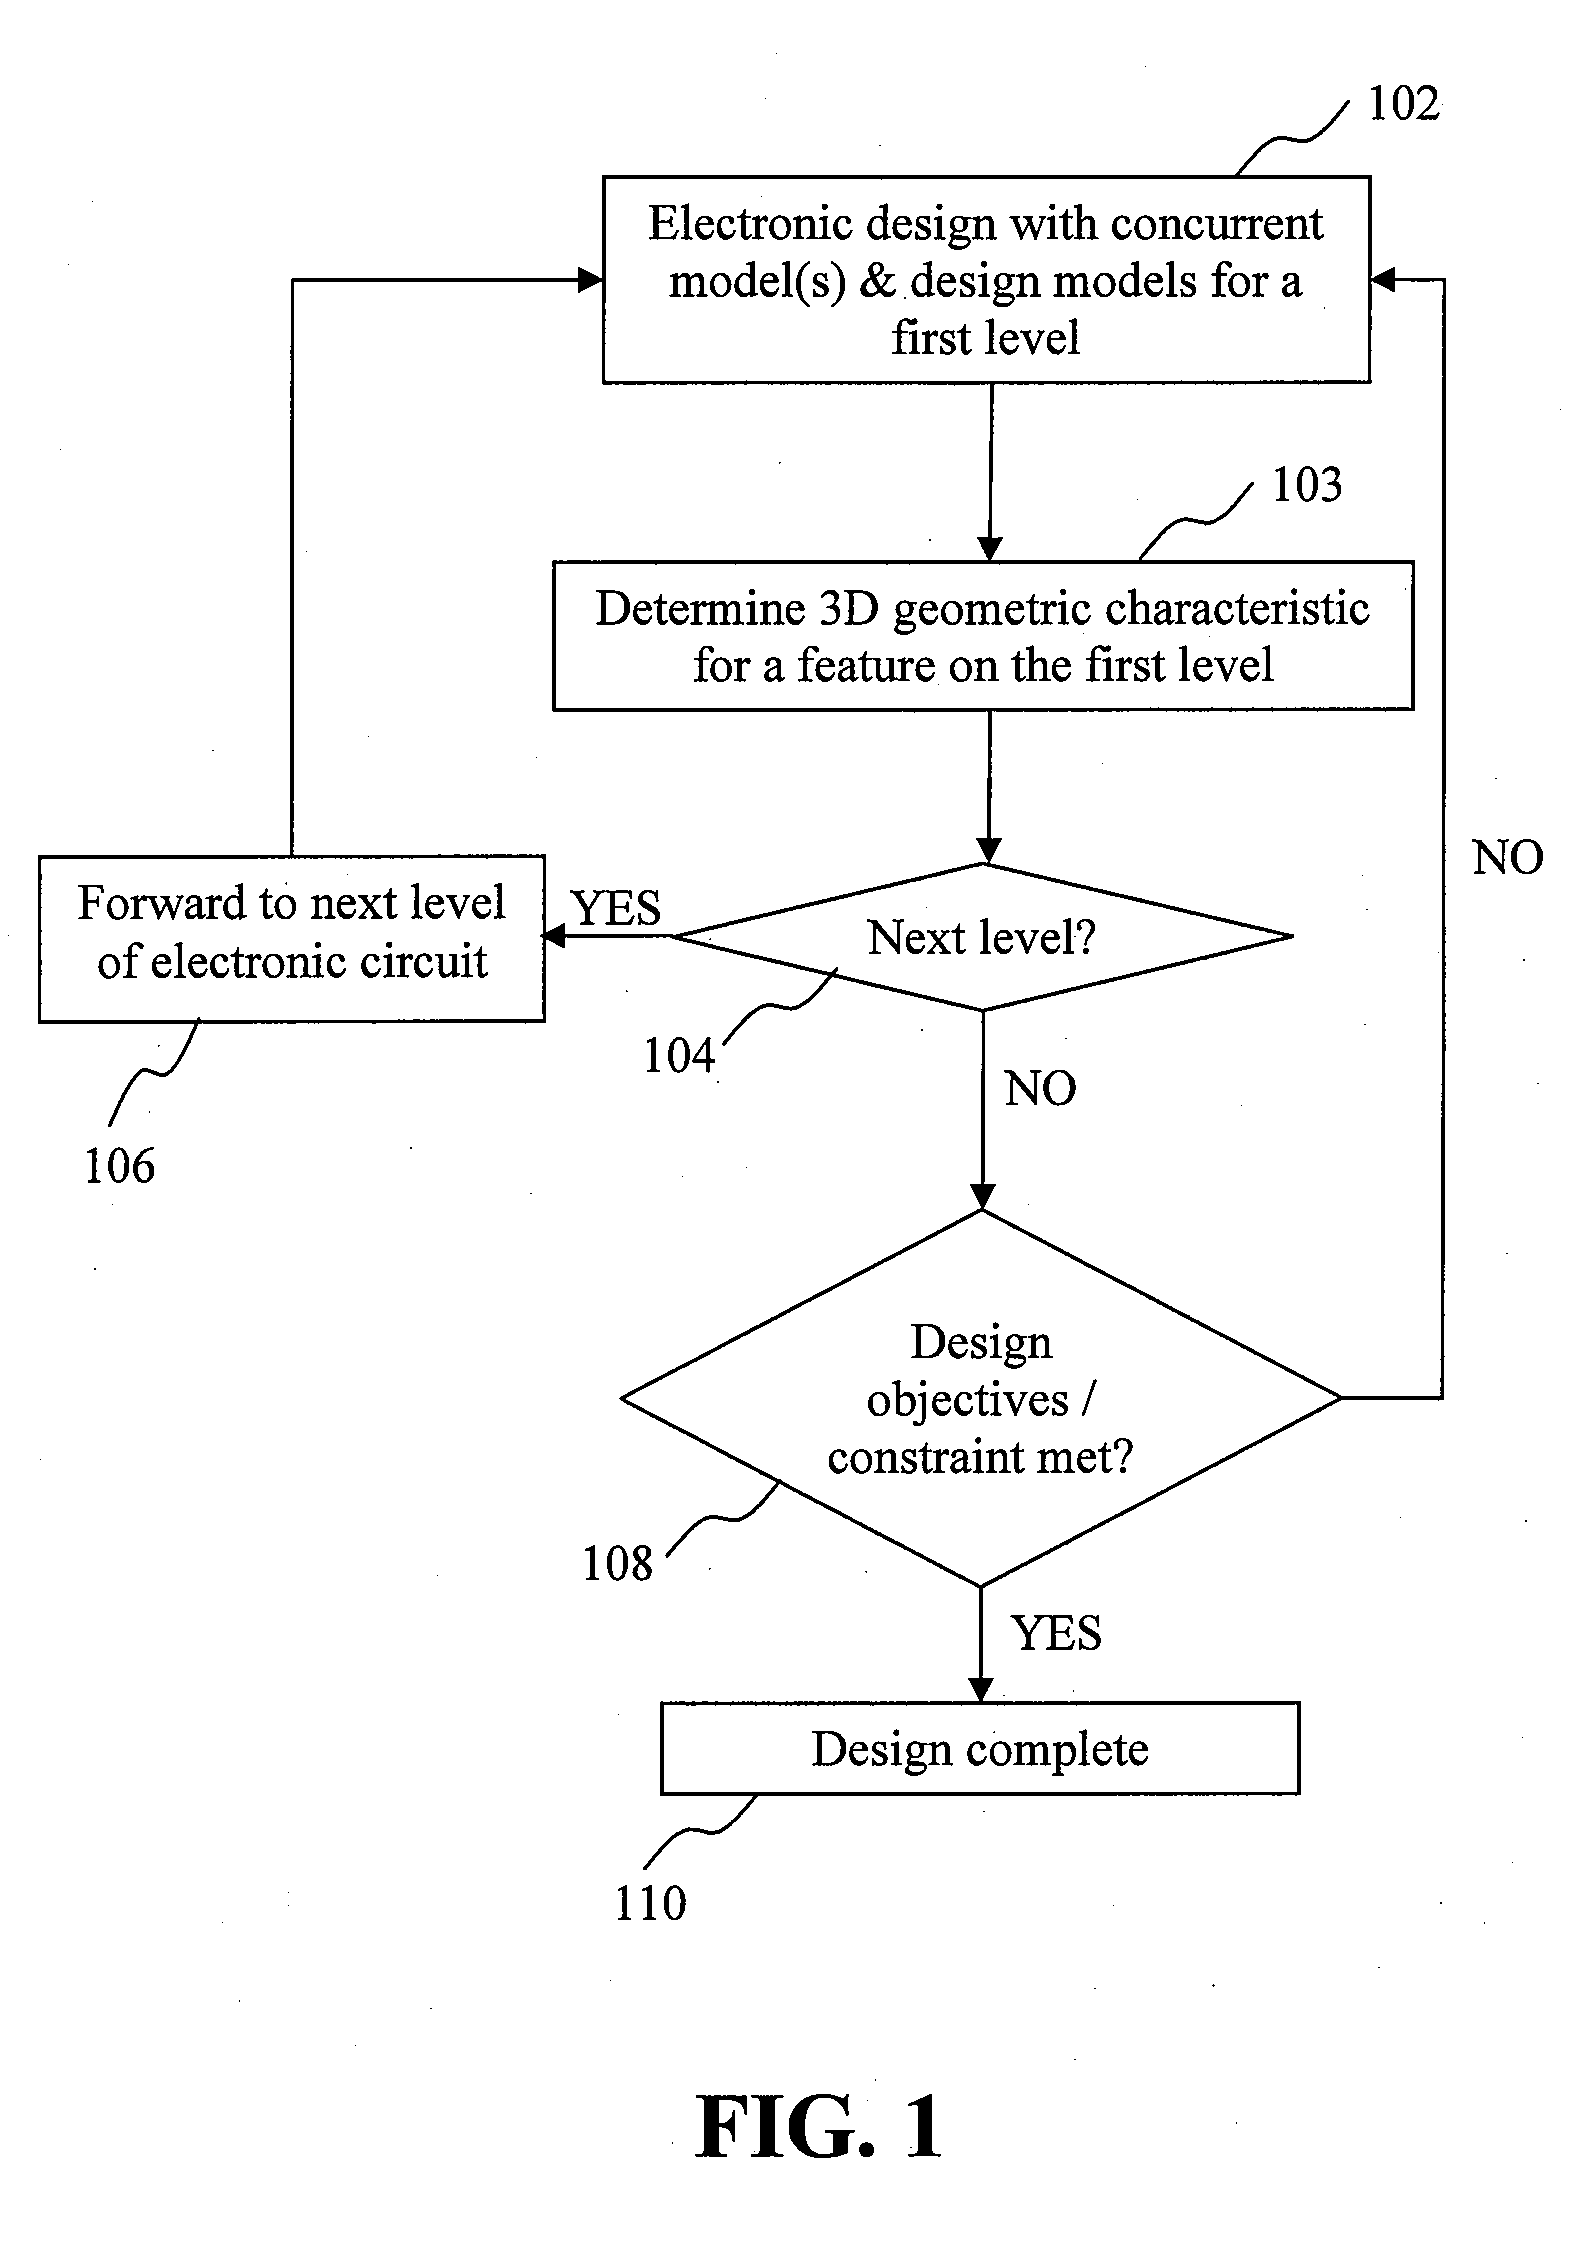 Method, system, and computer program product for determining three-dimensional feature characteristics in electronic designs